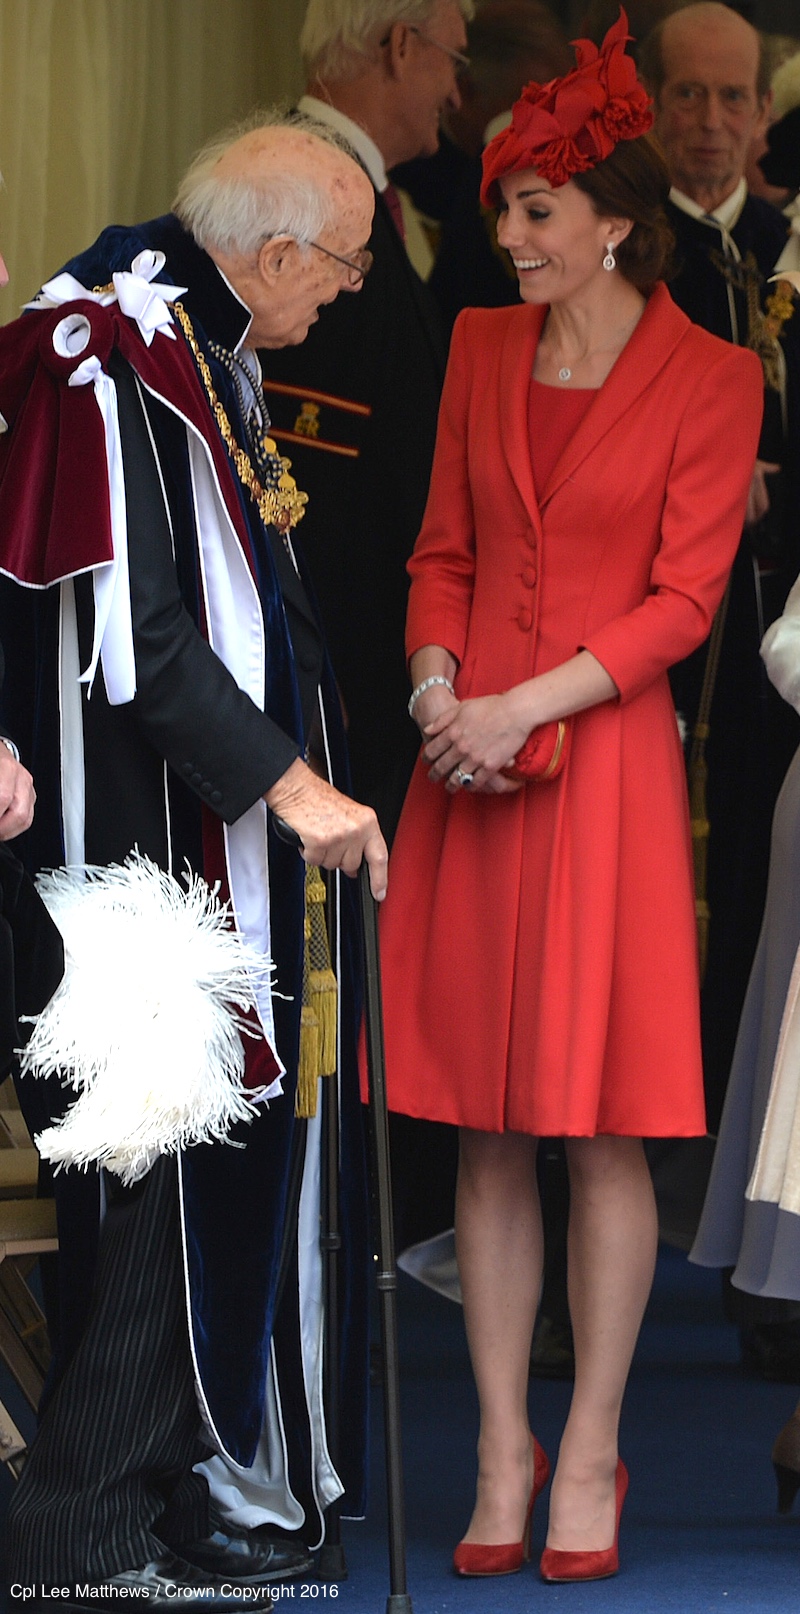 Kate Middleton wears red for the Order of the Garter ceremony